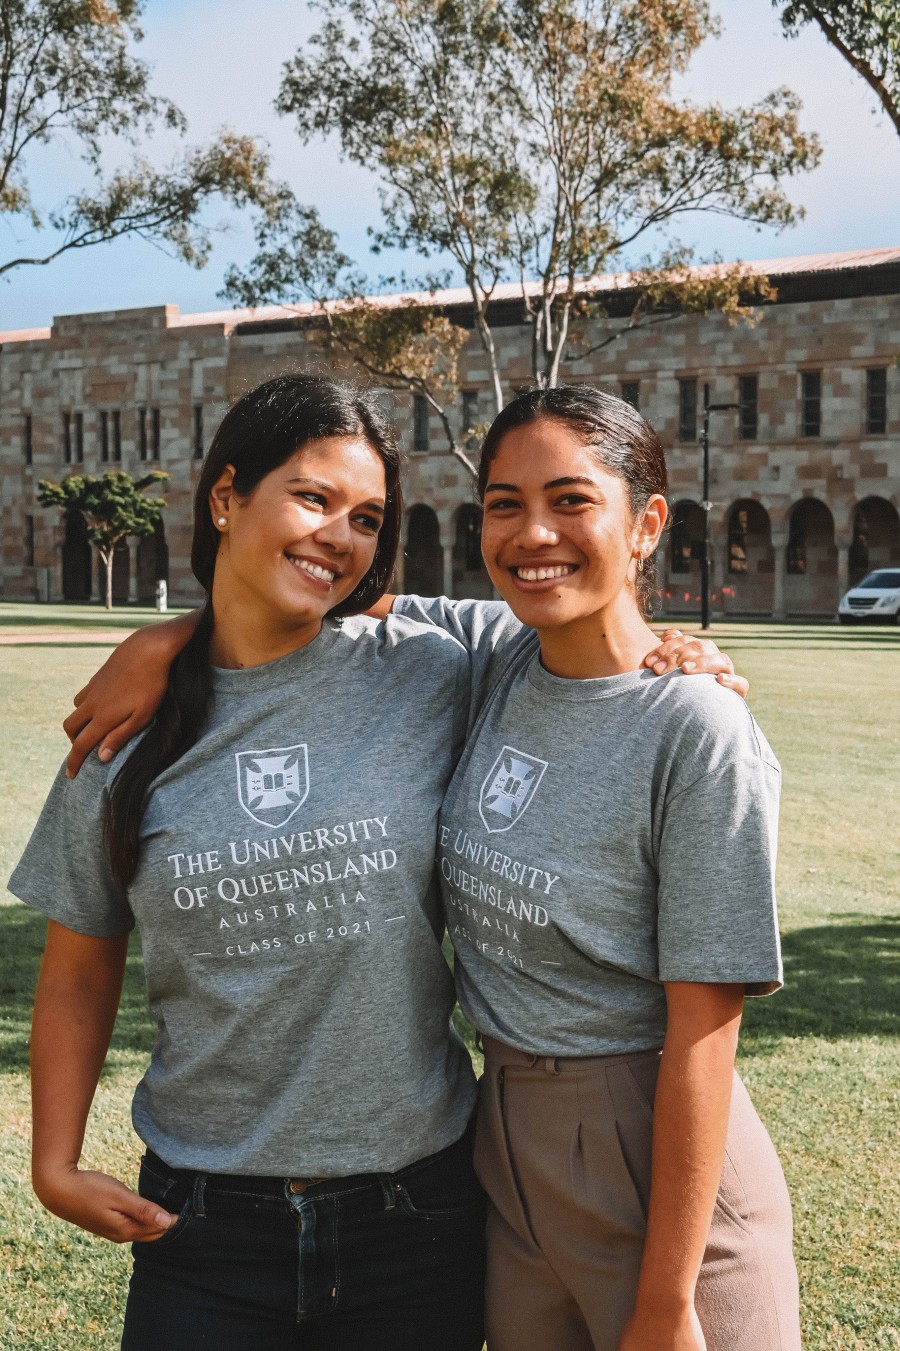 Two UQ alumna pose with their arms around each other while wearing unique gray with white embroidery class shirts.